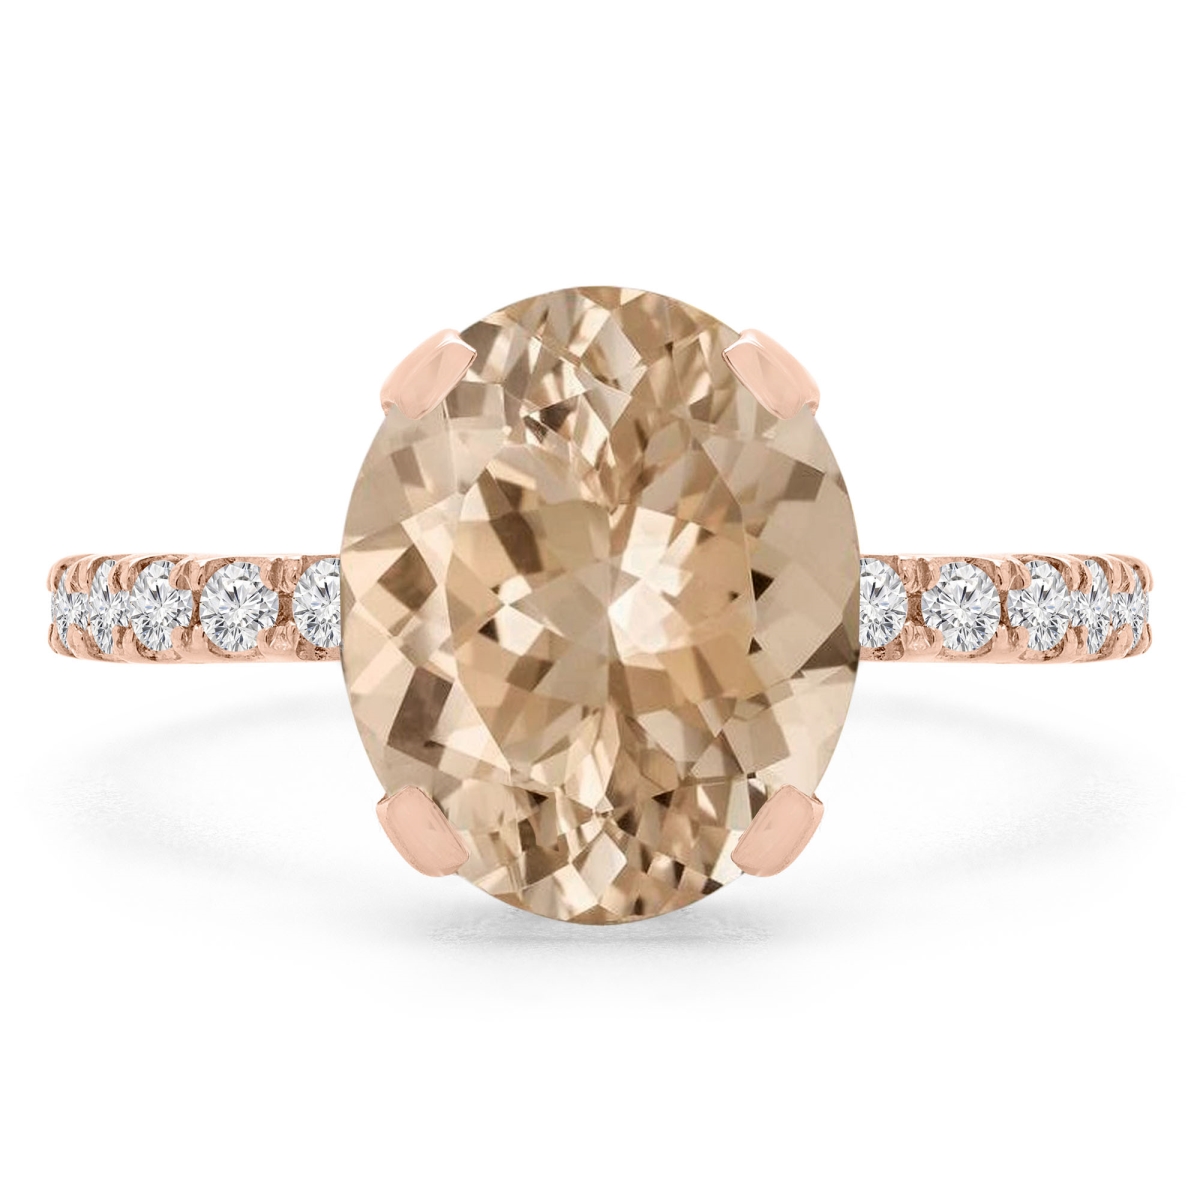 Picture of Majesty Diamonds MD190407-6.25 3.4 CTW Oval Pink Morganite Under Halo Engagement Ring in 14K Rose Gold - Size 6.25